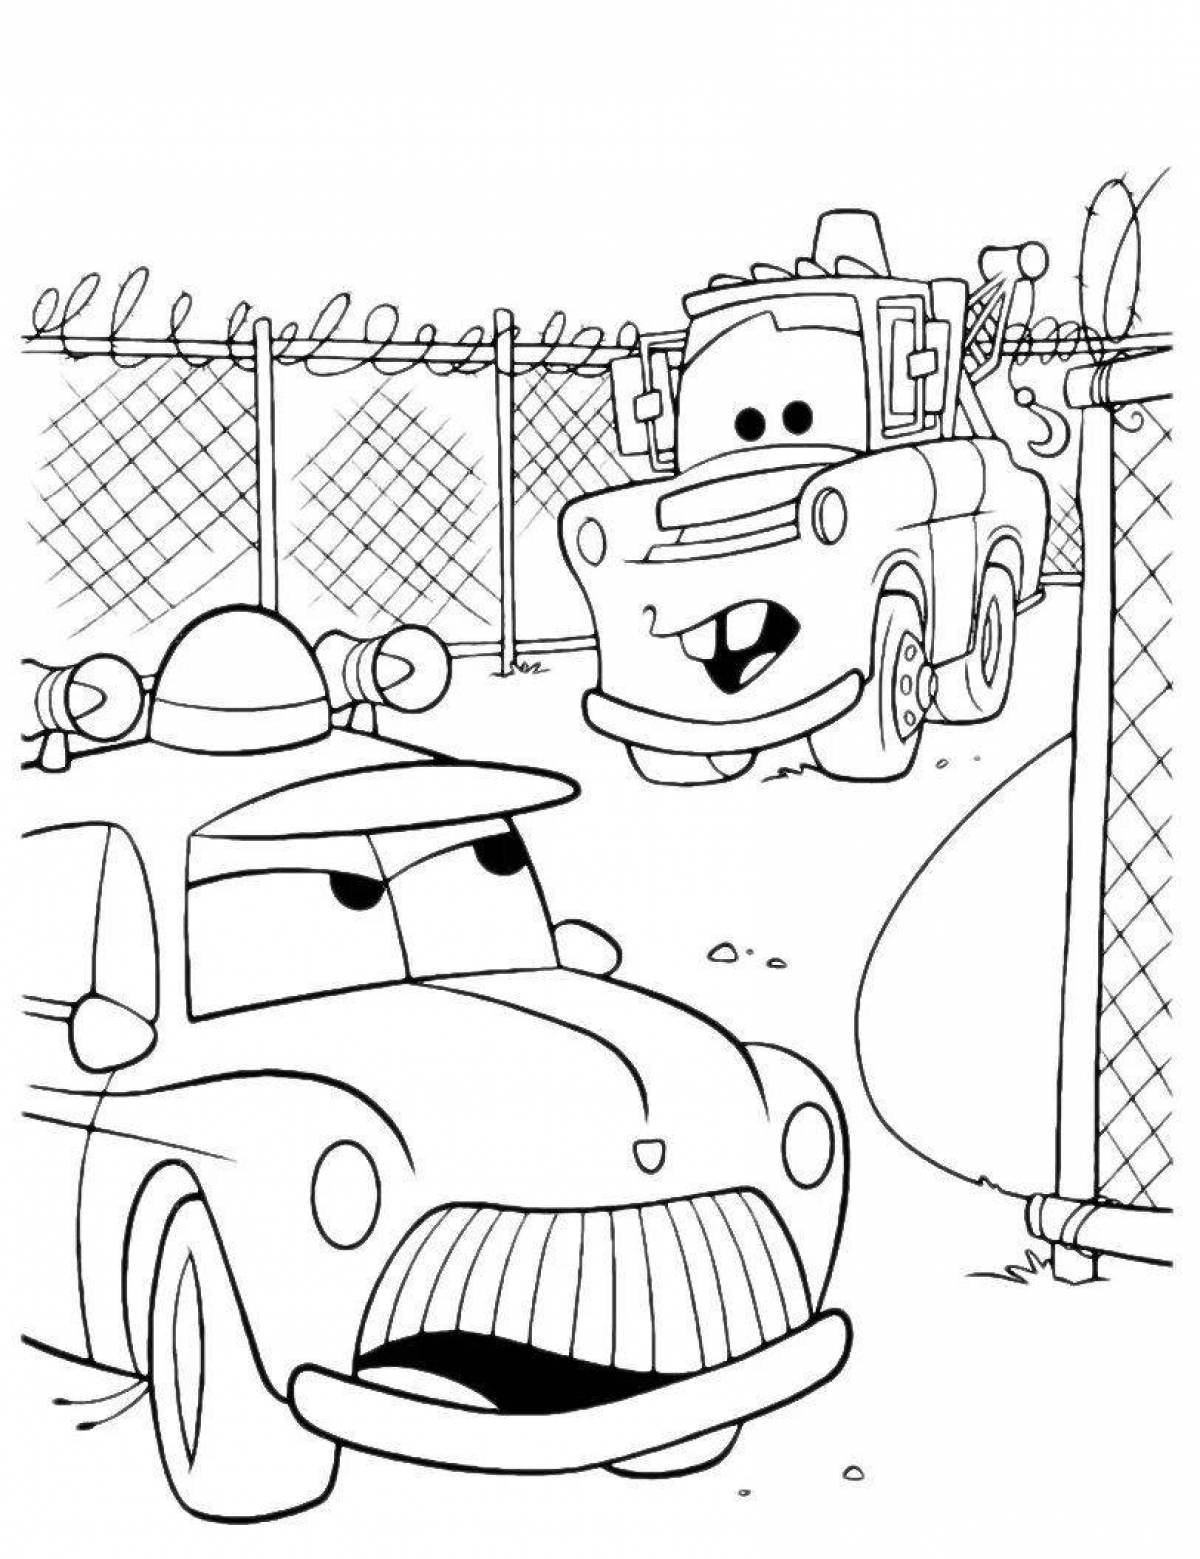 Sheriff's stylish car coloring page